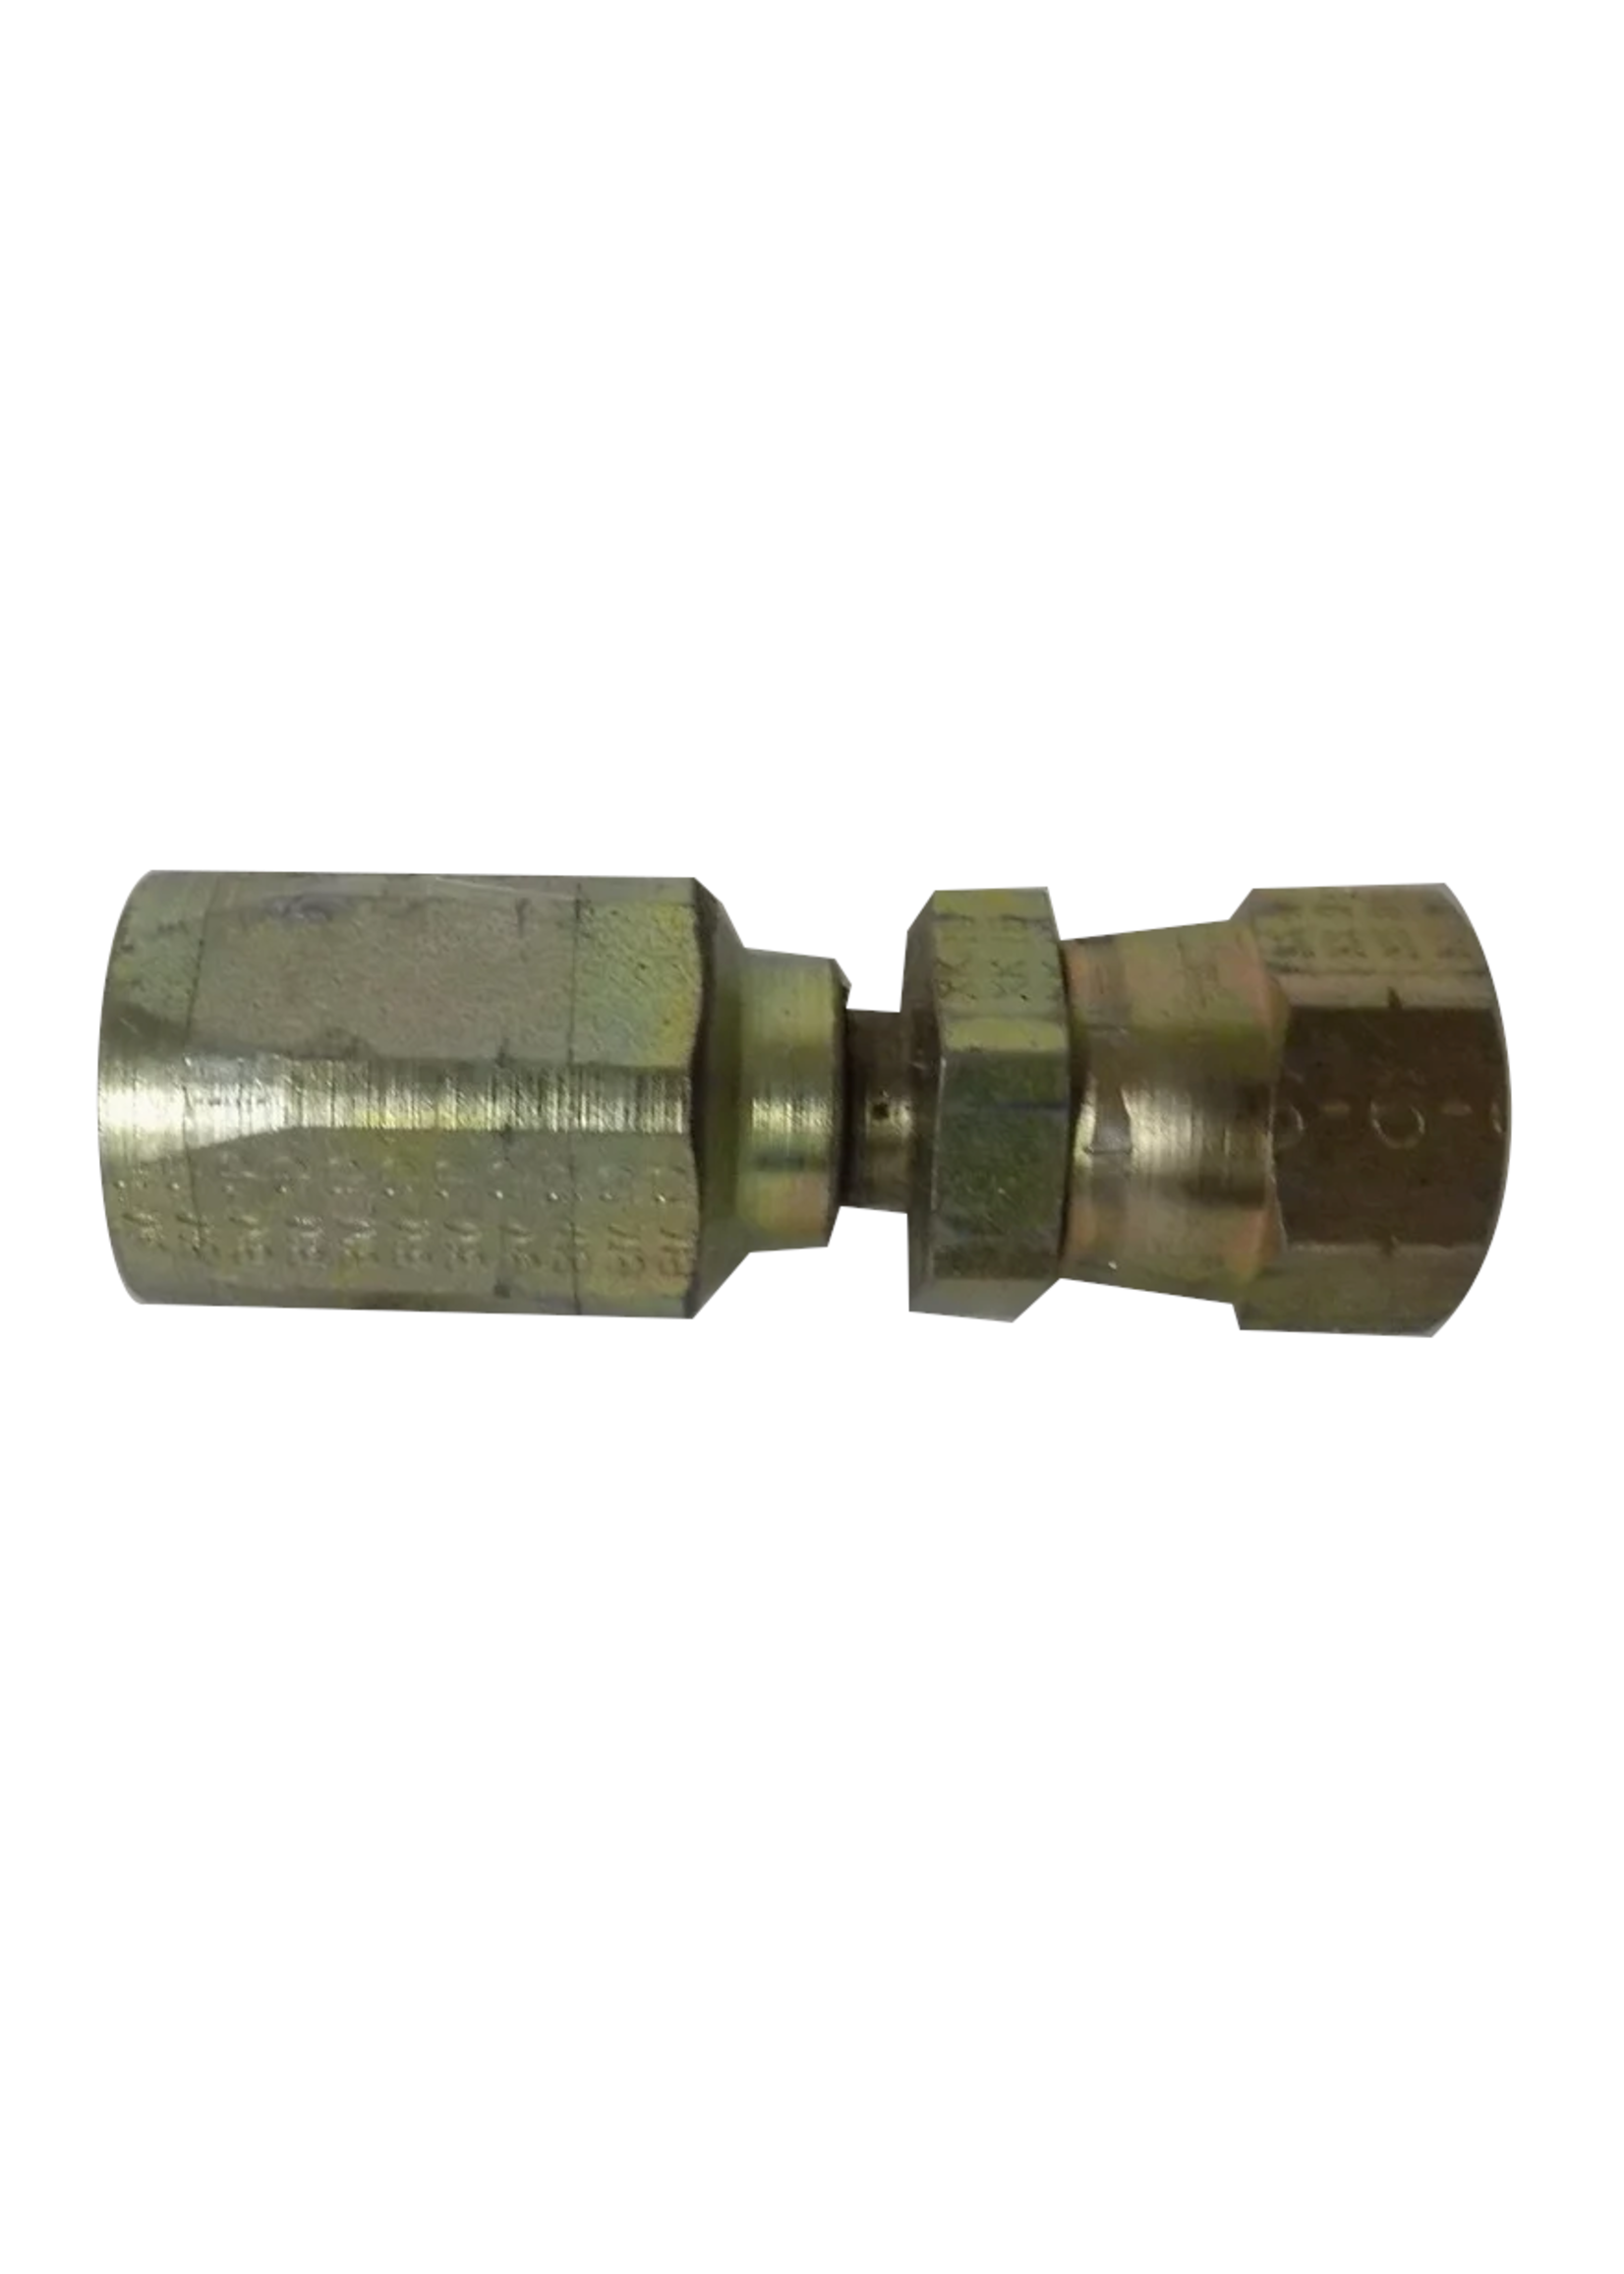 Pro Forge 2 Part steel forge hose fitting